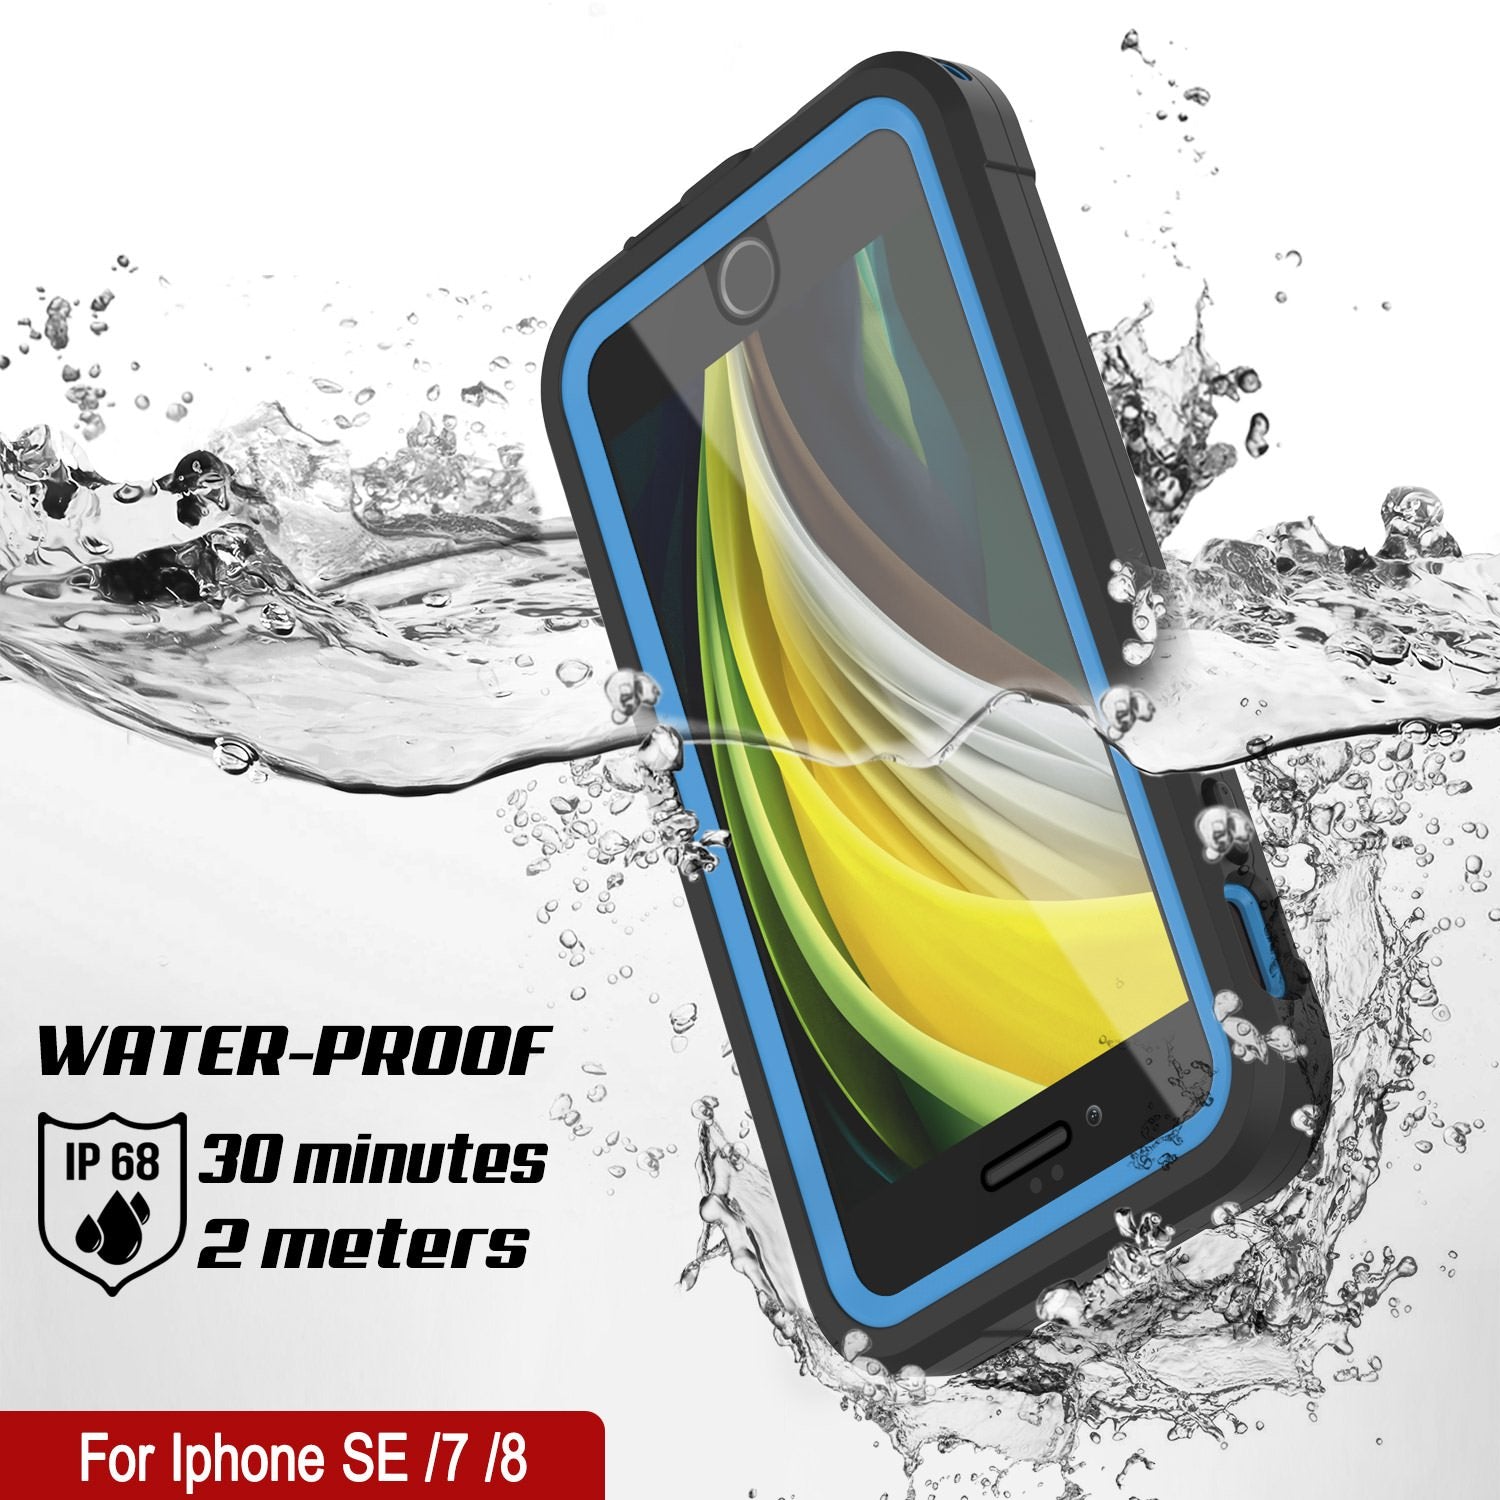 iPhone 8 Waterproof IP68 Case, Punkcase [Blue]  [Maximus Series] [Slim Fit] [IP68 Certified] [Shockresistant] Clear Armor Cover with Screen Protector | Ultimate Protection